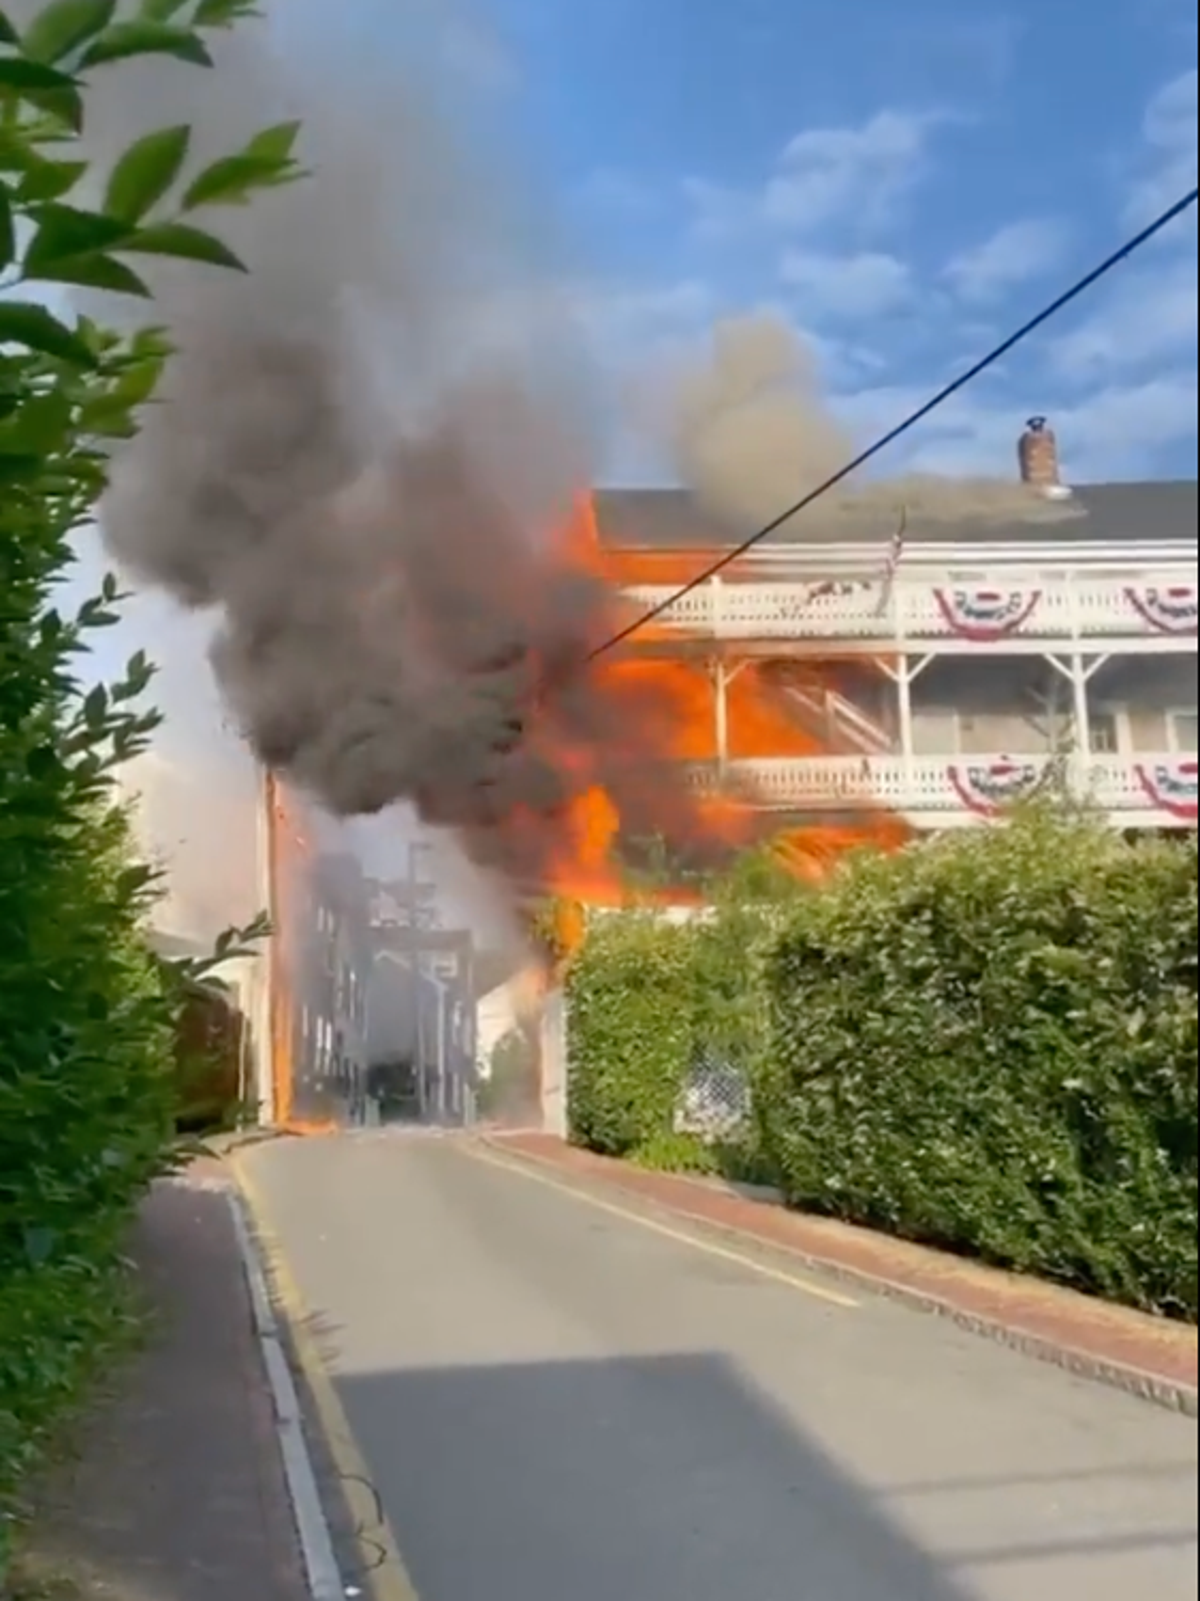 Off-duty fire captain saves guests as blaze engulfs historic hotel on Nantucket Island